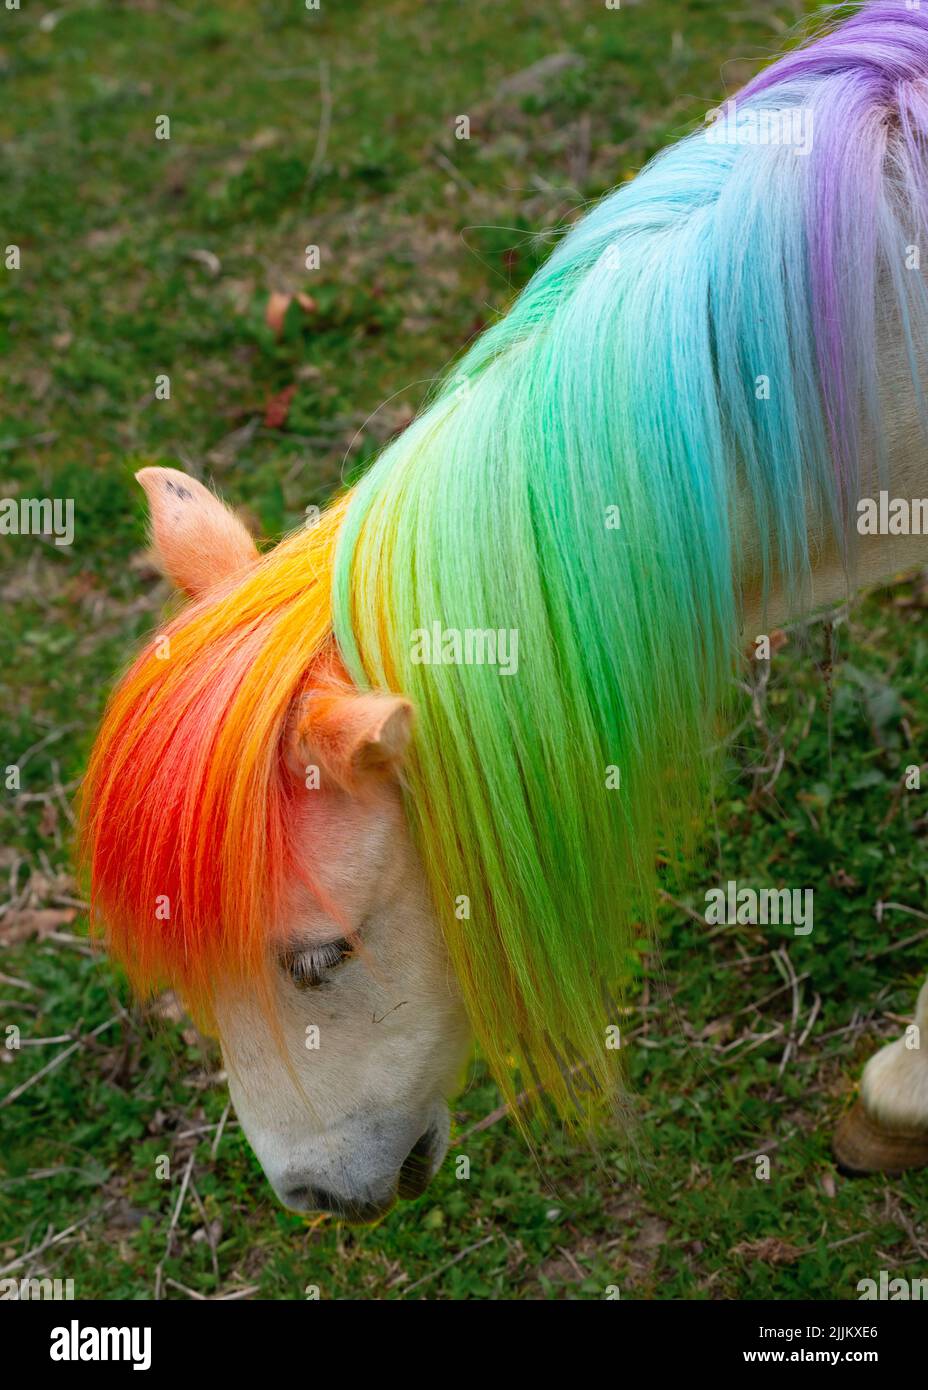 My LIttle Pony, a White horse with a rainbow main. Stock Photo